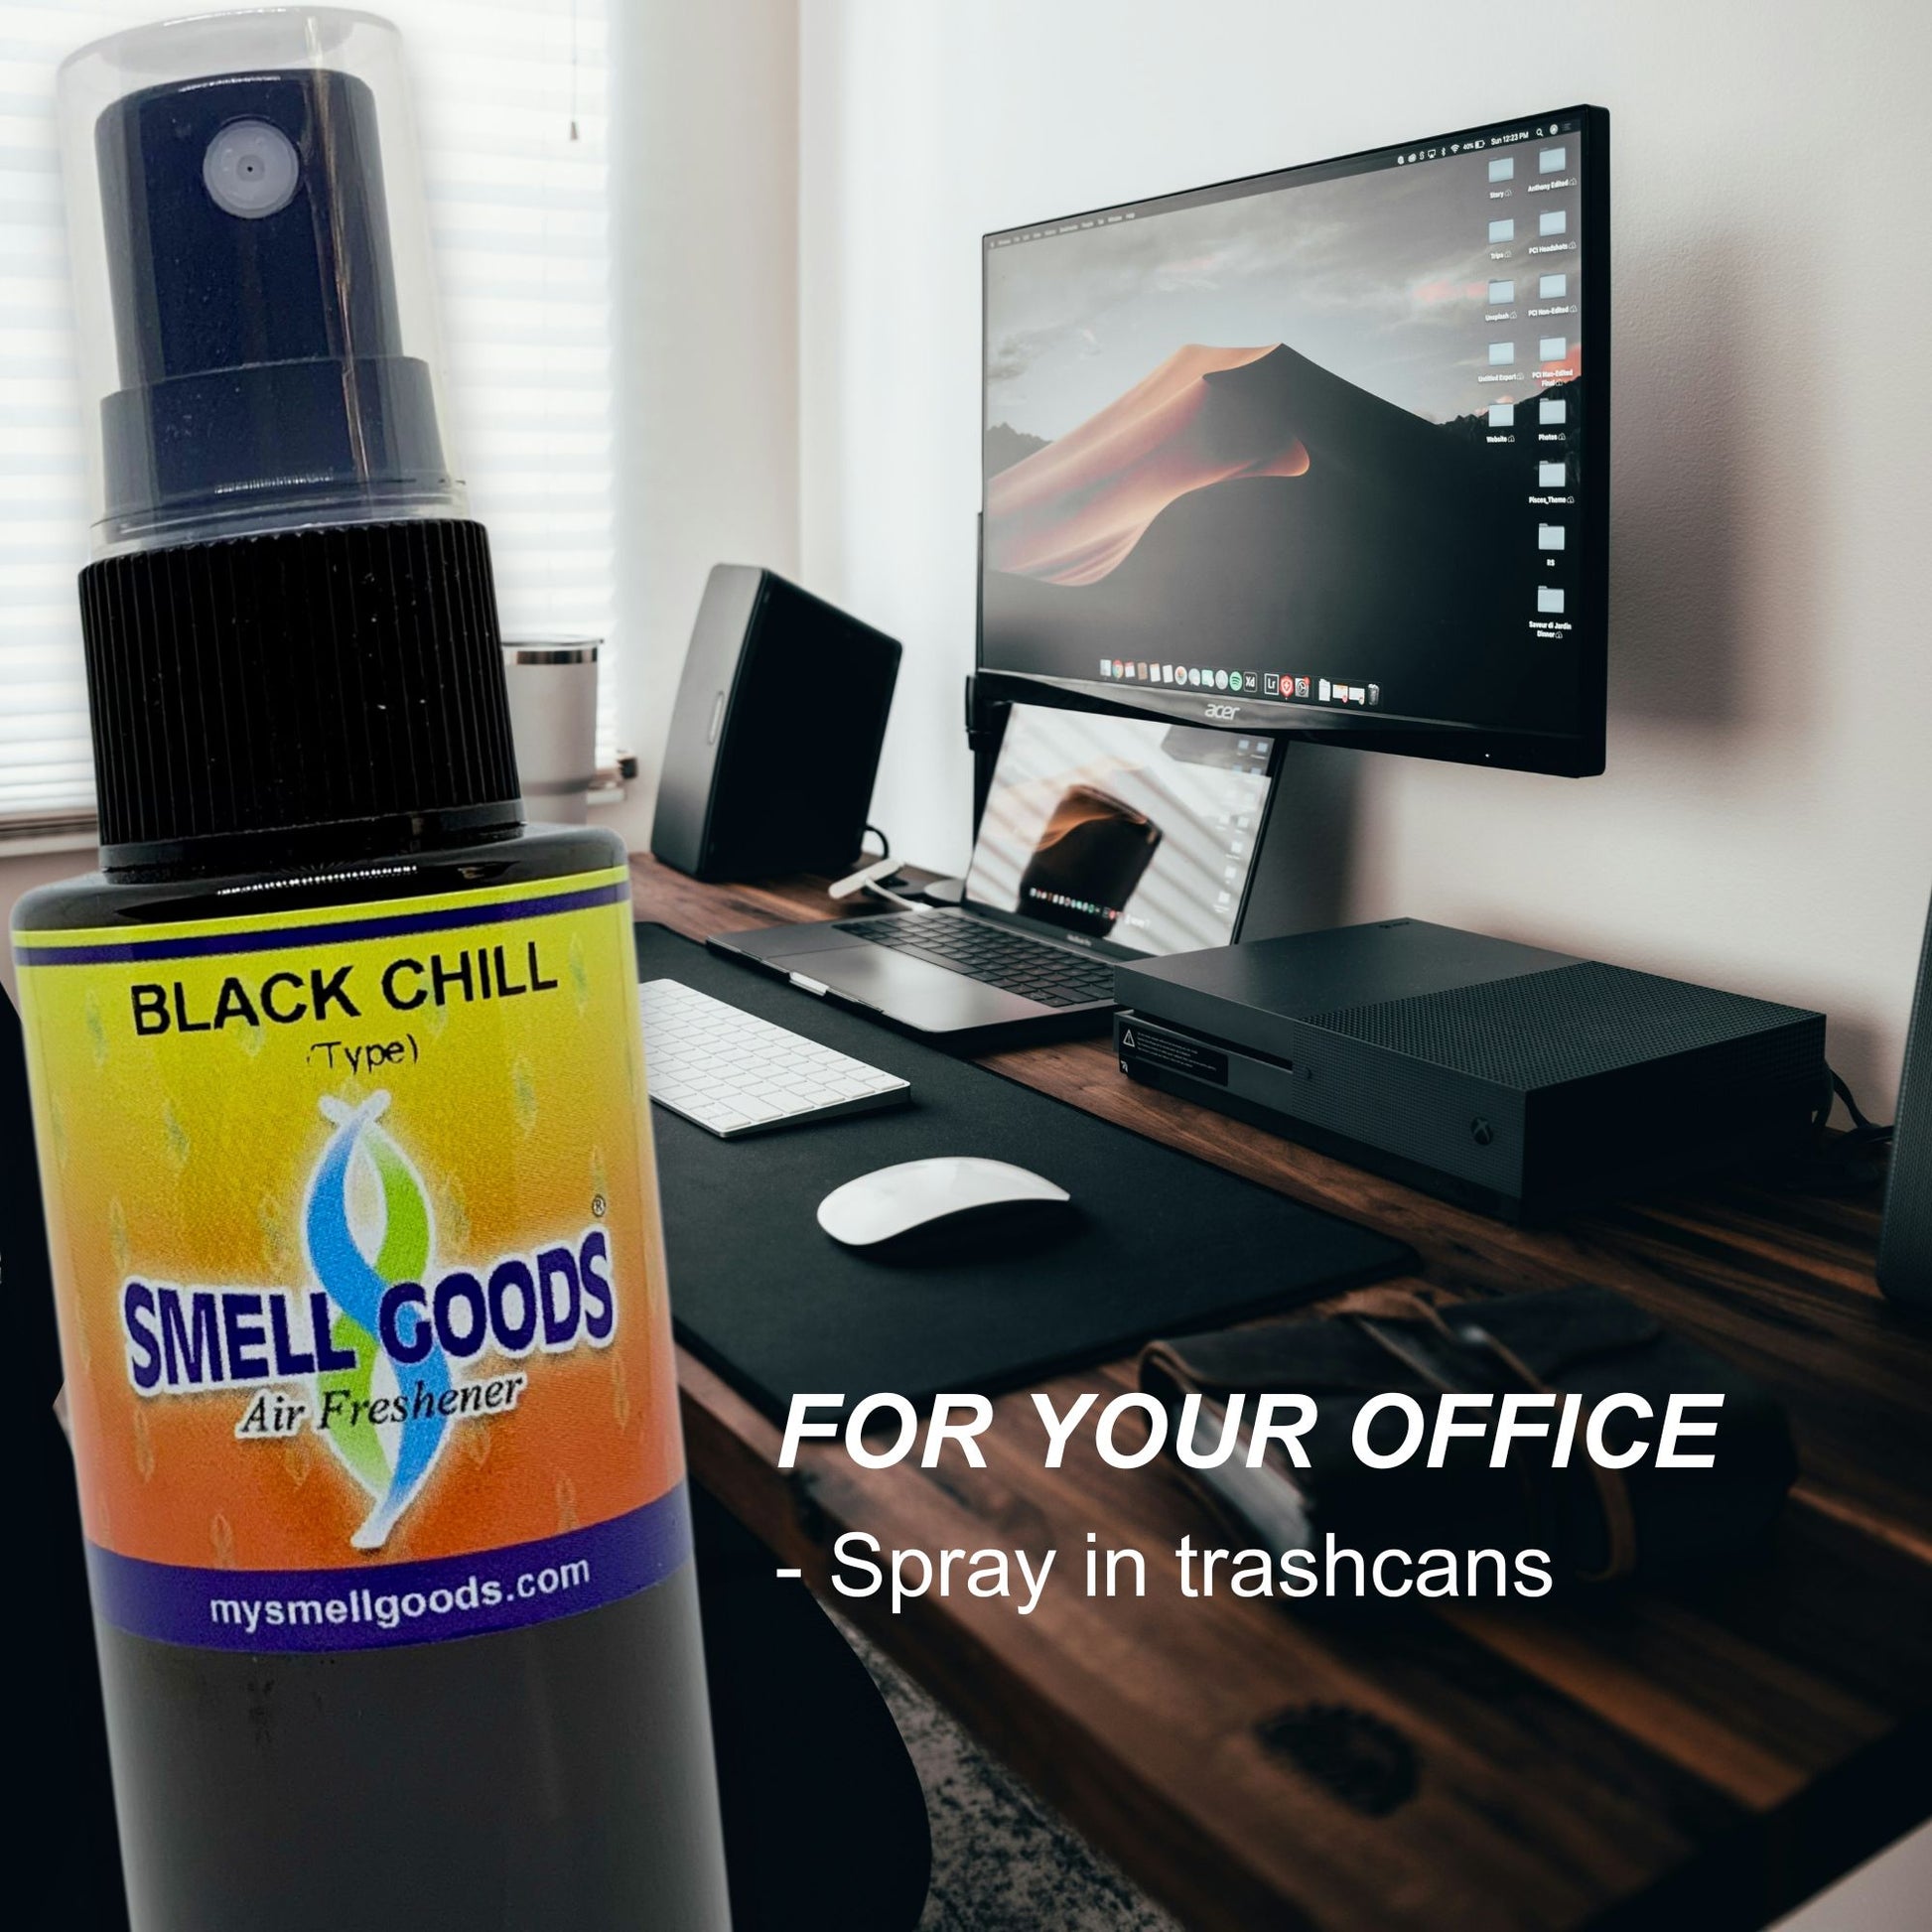 Black Chill (Type) Air Freshener by Smell Goods can be used in your office.